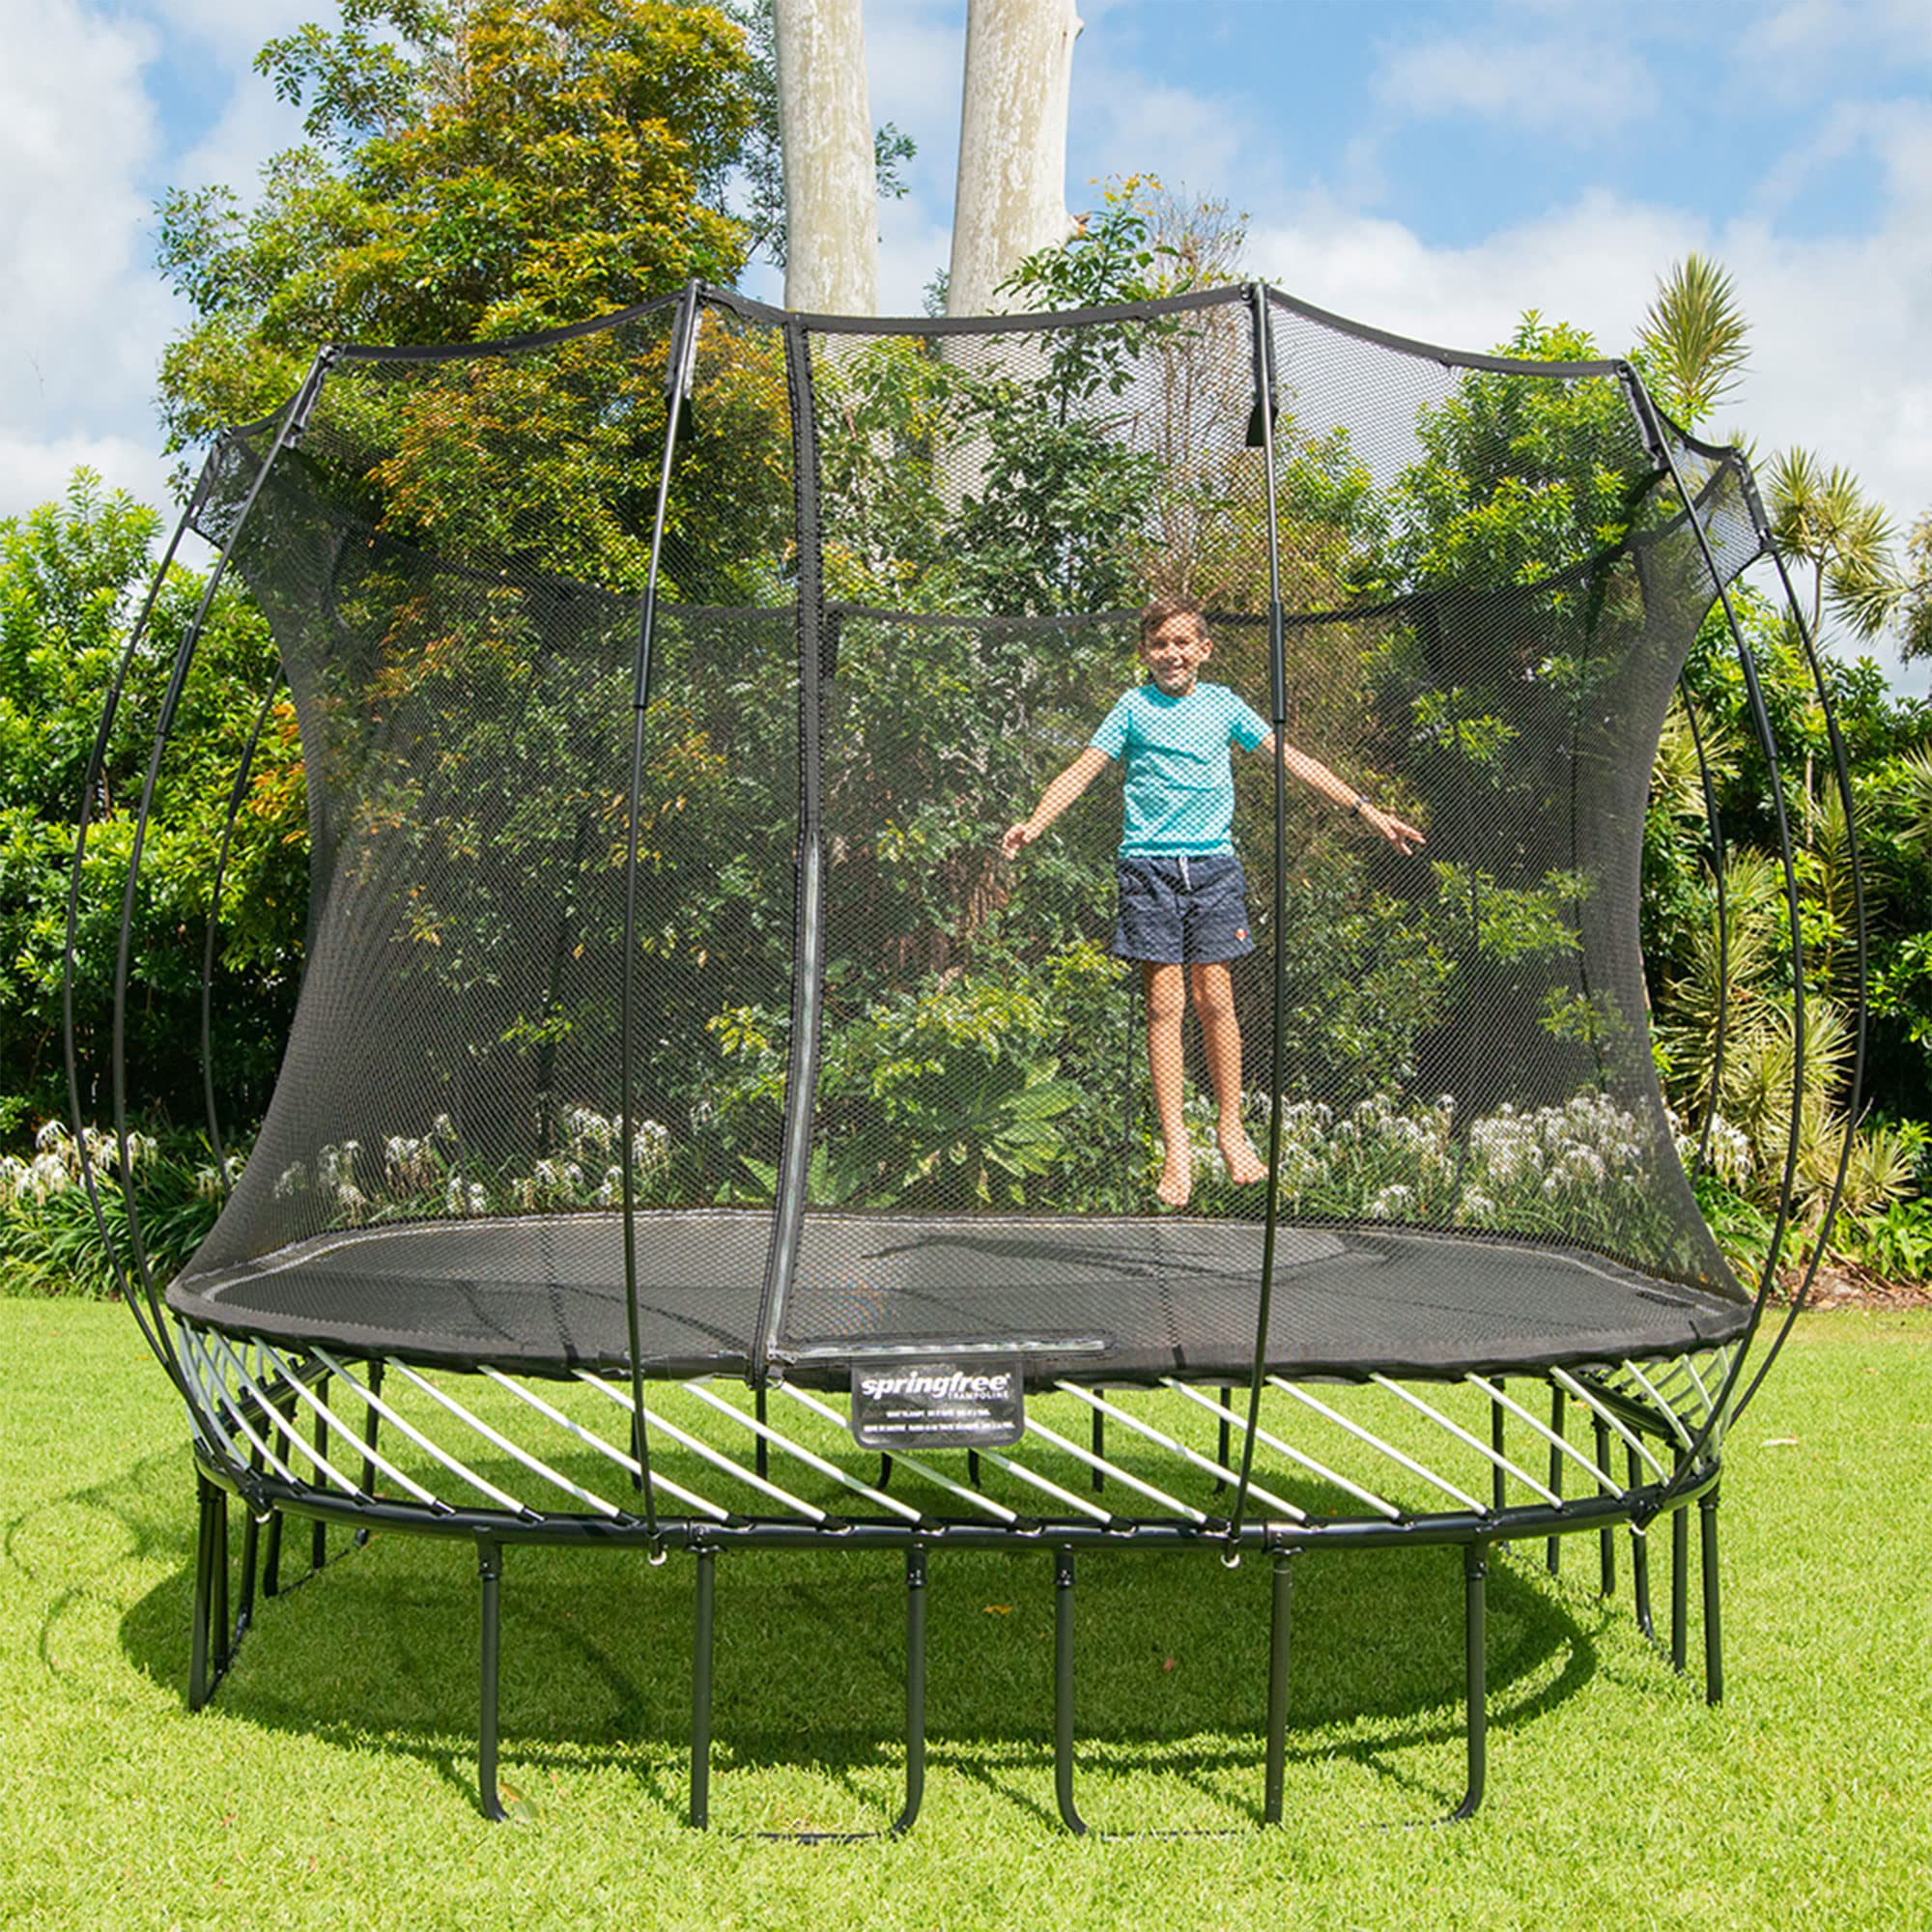 Springfree Trampoline Outdoor 11 x 11 Foot Large Square Trampoline with FlexiNet Safety Enclosure and SoftEdge Jump Bounce Mat Outdoor Play Equipment